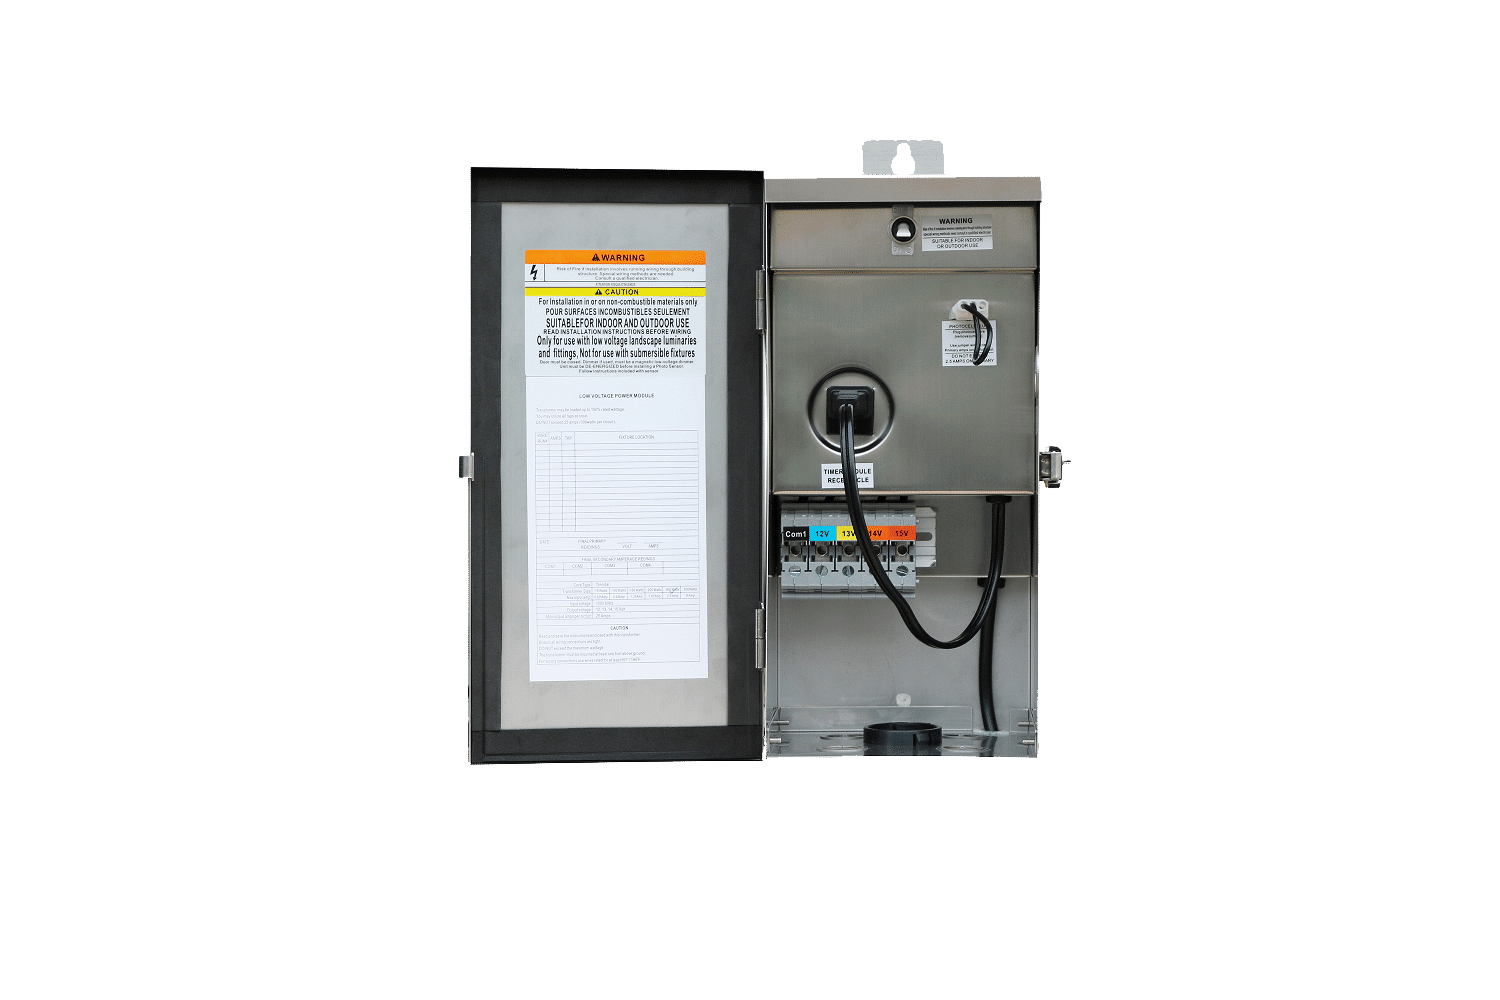 Westgate TR-300W-MT-SS Multi-Tap Landscape Transformer Timer & Photocell Ready (Not Included) Hinge Door - Stainless Steel